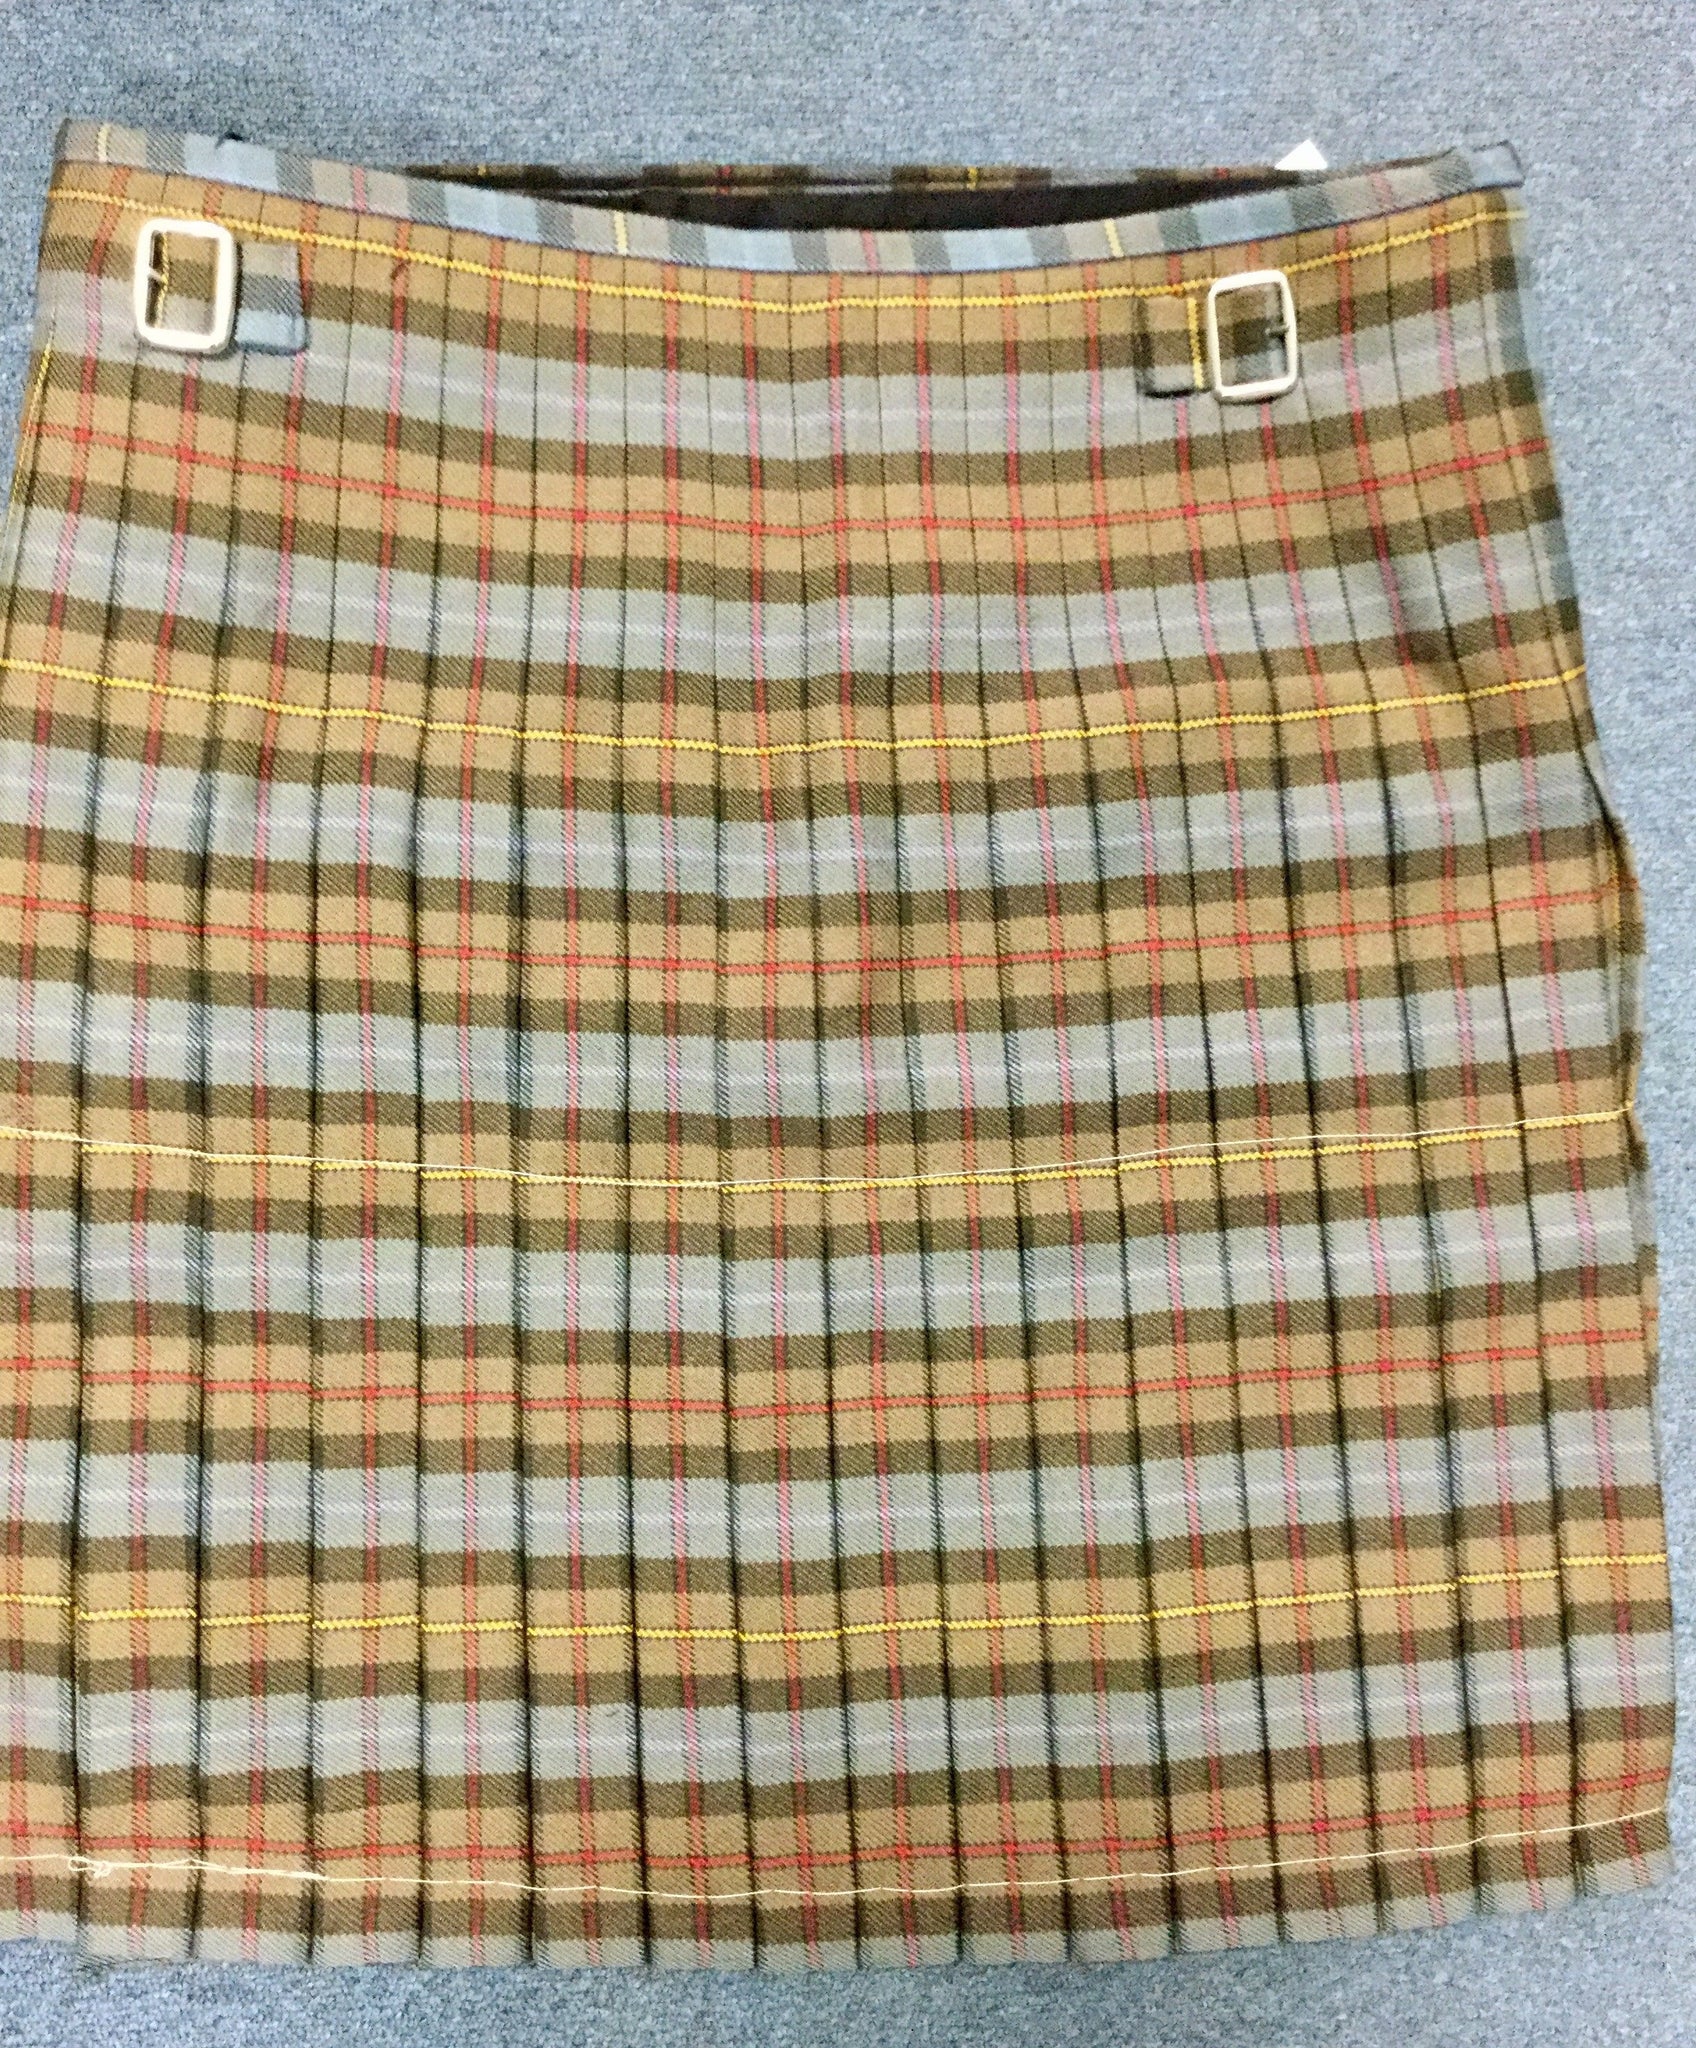 Box Pleat kilt pleated to the red stripe.